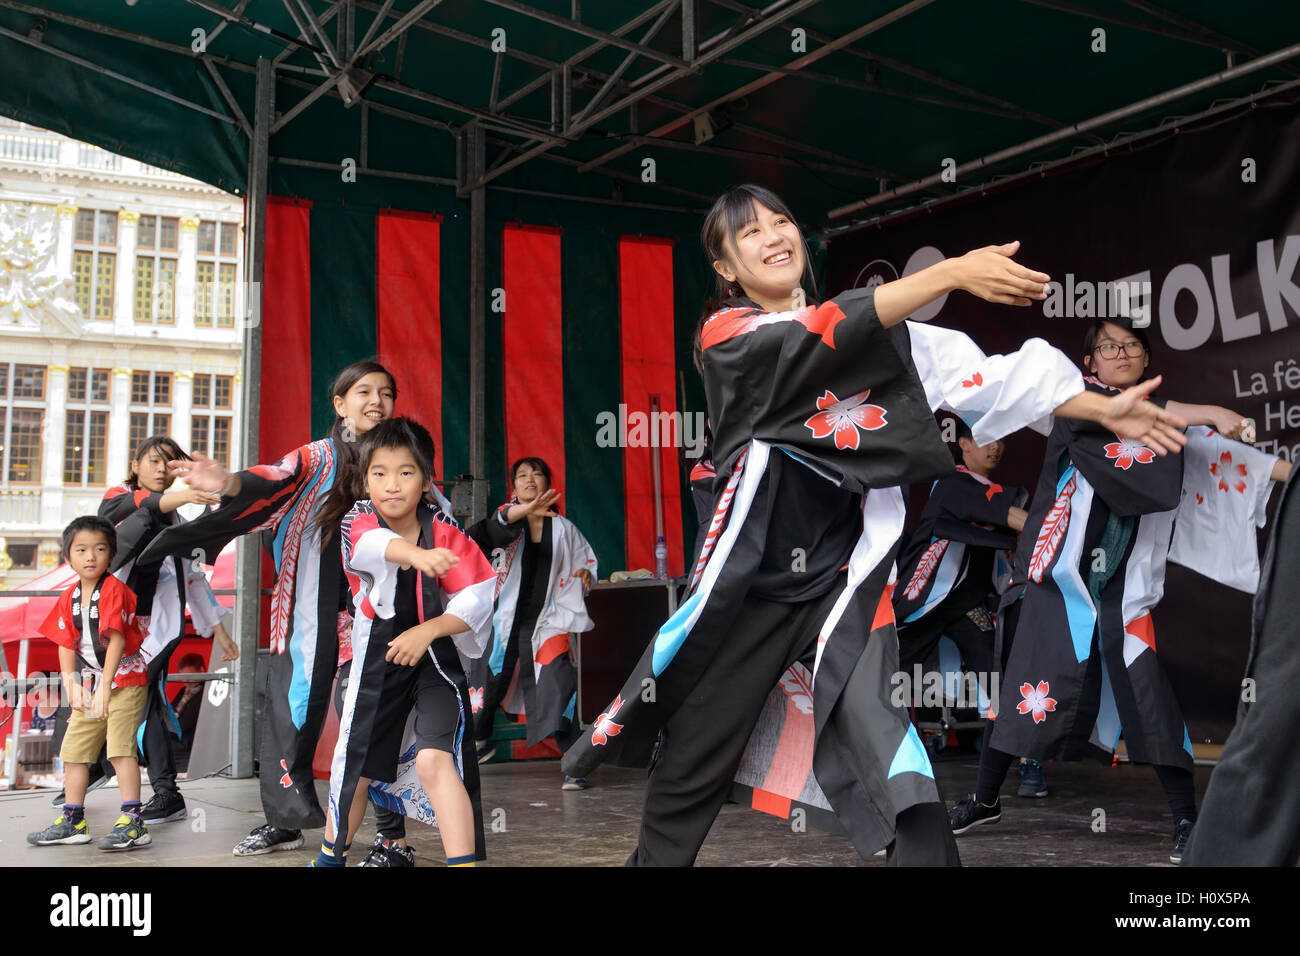 Concert of Yosakoi Japanese traditional dance group on Grand Place during Folklorissimo 2016 Folkloric Festival in Brussels, Bel Stock Photo